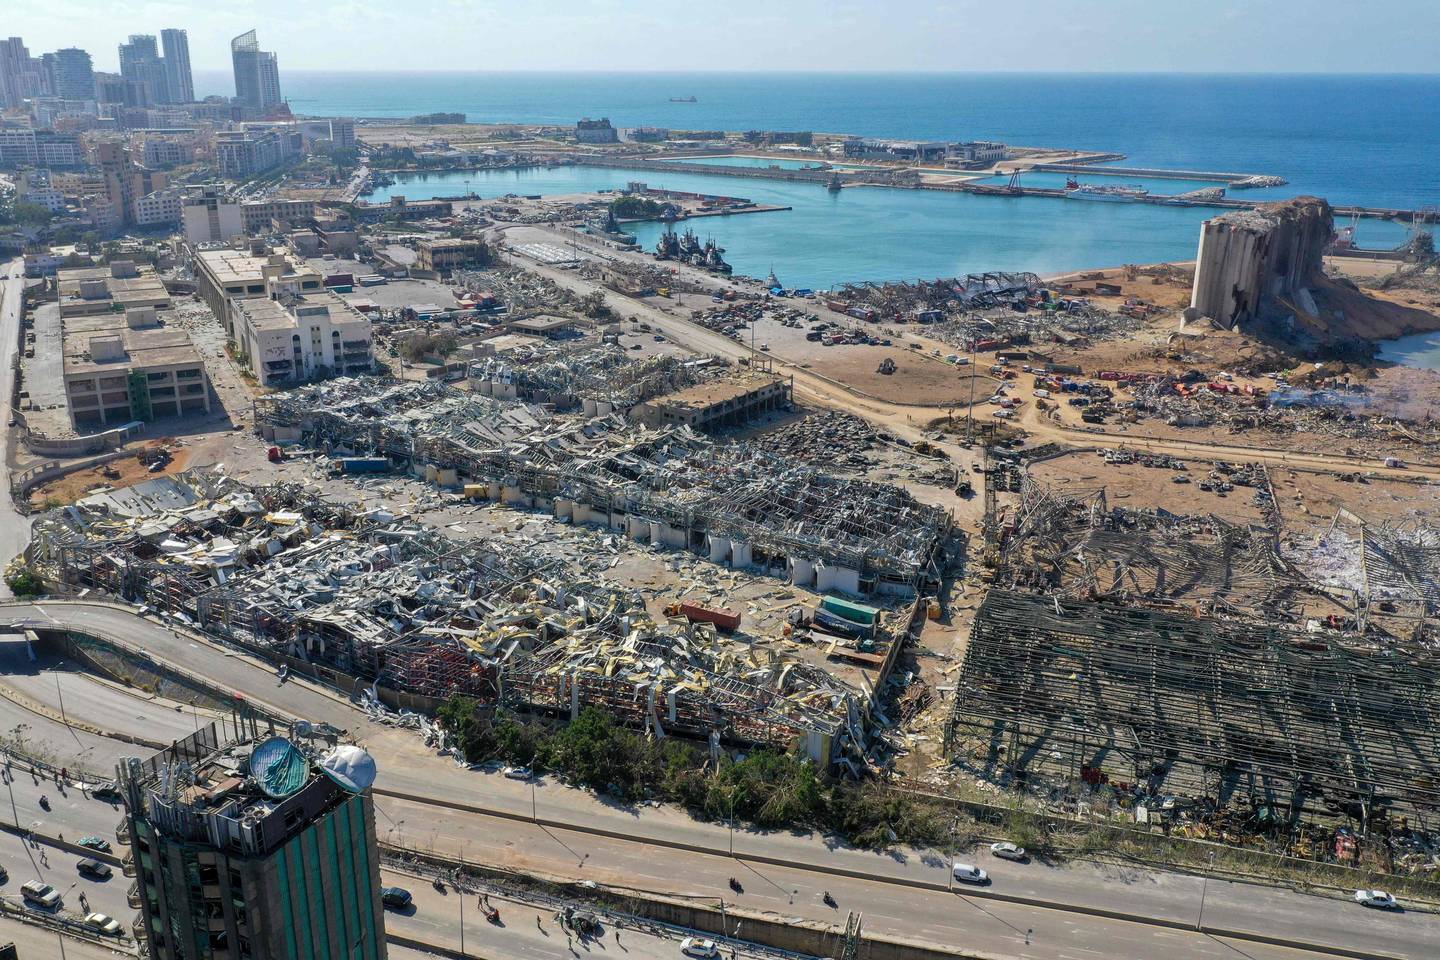 TOPSHOT - An aerial view shows the massive damage done to Beirut port's grain silos (C) and the area around it on August 5, 2020, one day after a mega-blast tore through the harbour in the heart of the Lebanese capital with the force of an earthquake, killing more than 100 people and injuring over 4,000. - Rescuers searched for survivors in Beirut in the morning after a cataclysmic explosion at the port sowed devastation across entire neighbourhoods, killing more than 100 people, wounding thousands and plunging Lebanon deeper into crisis. (Photo by - / AFP)